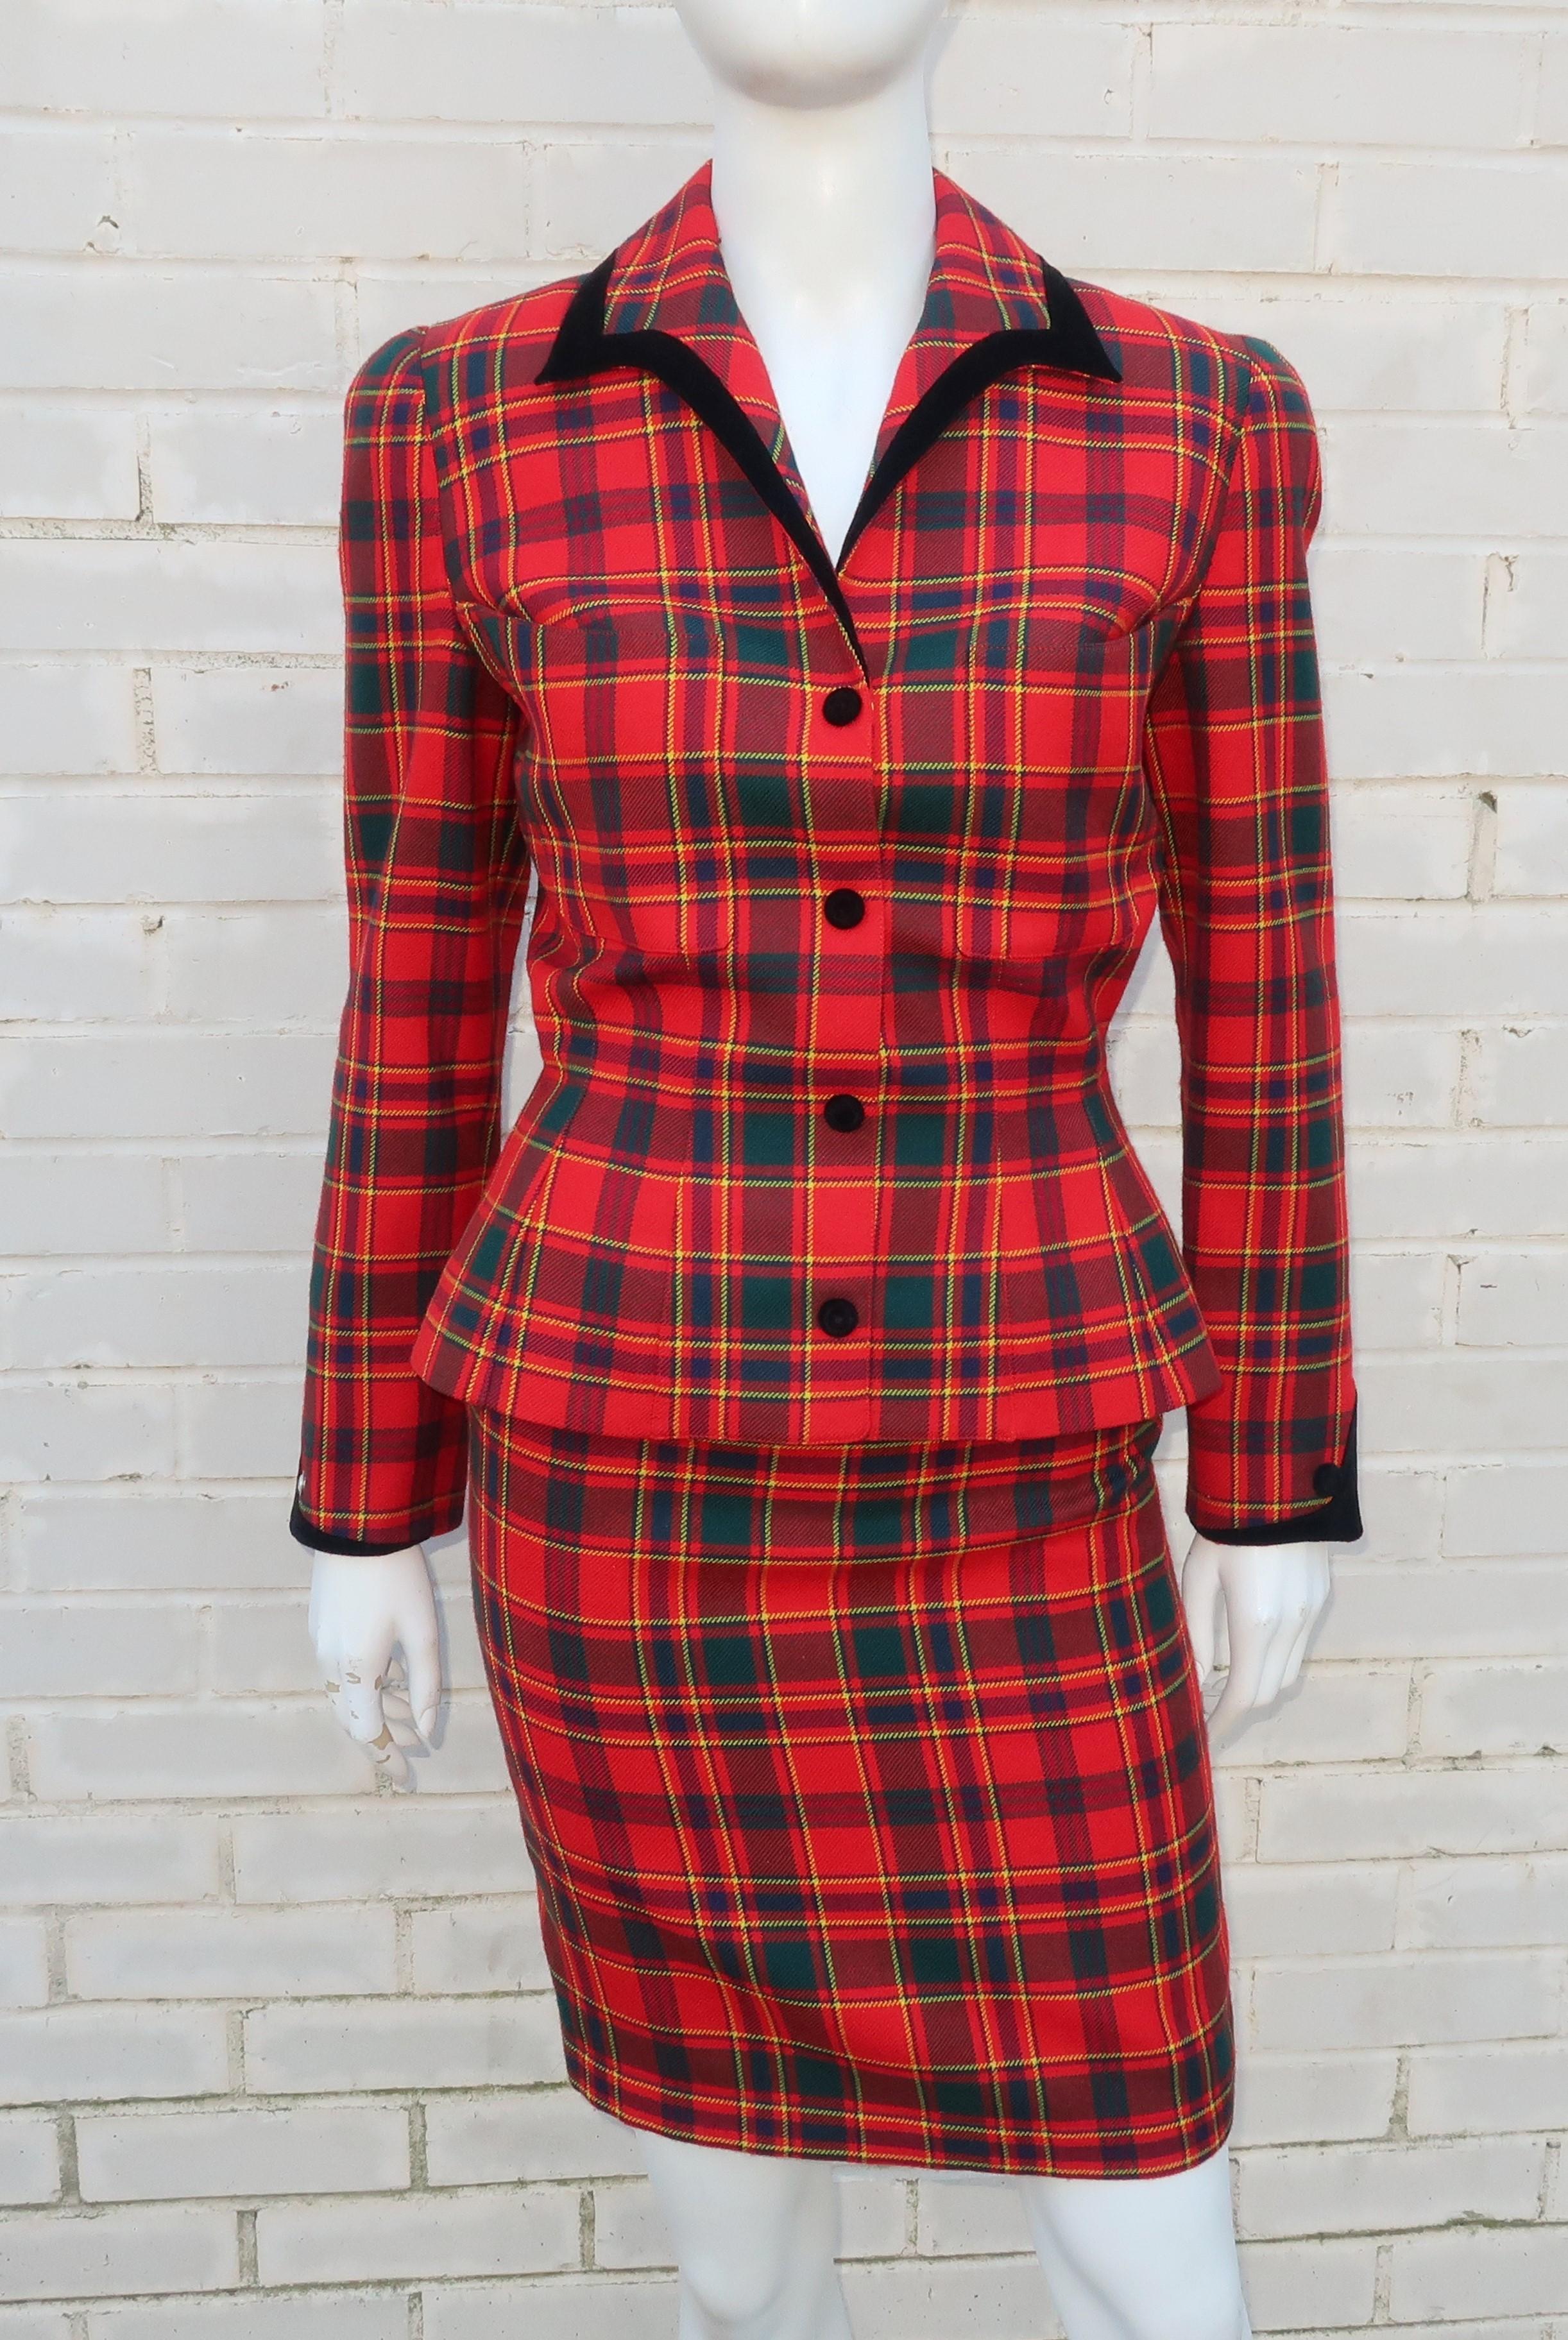 Women's Thierry Mugler Red Plaid Suit With Black Velvet Trim